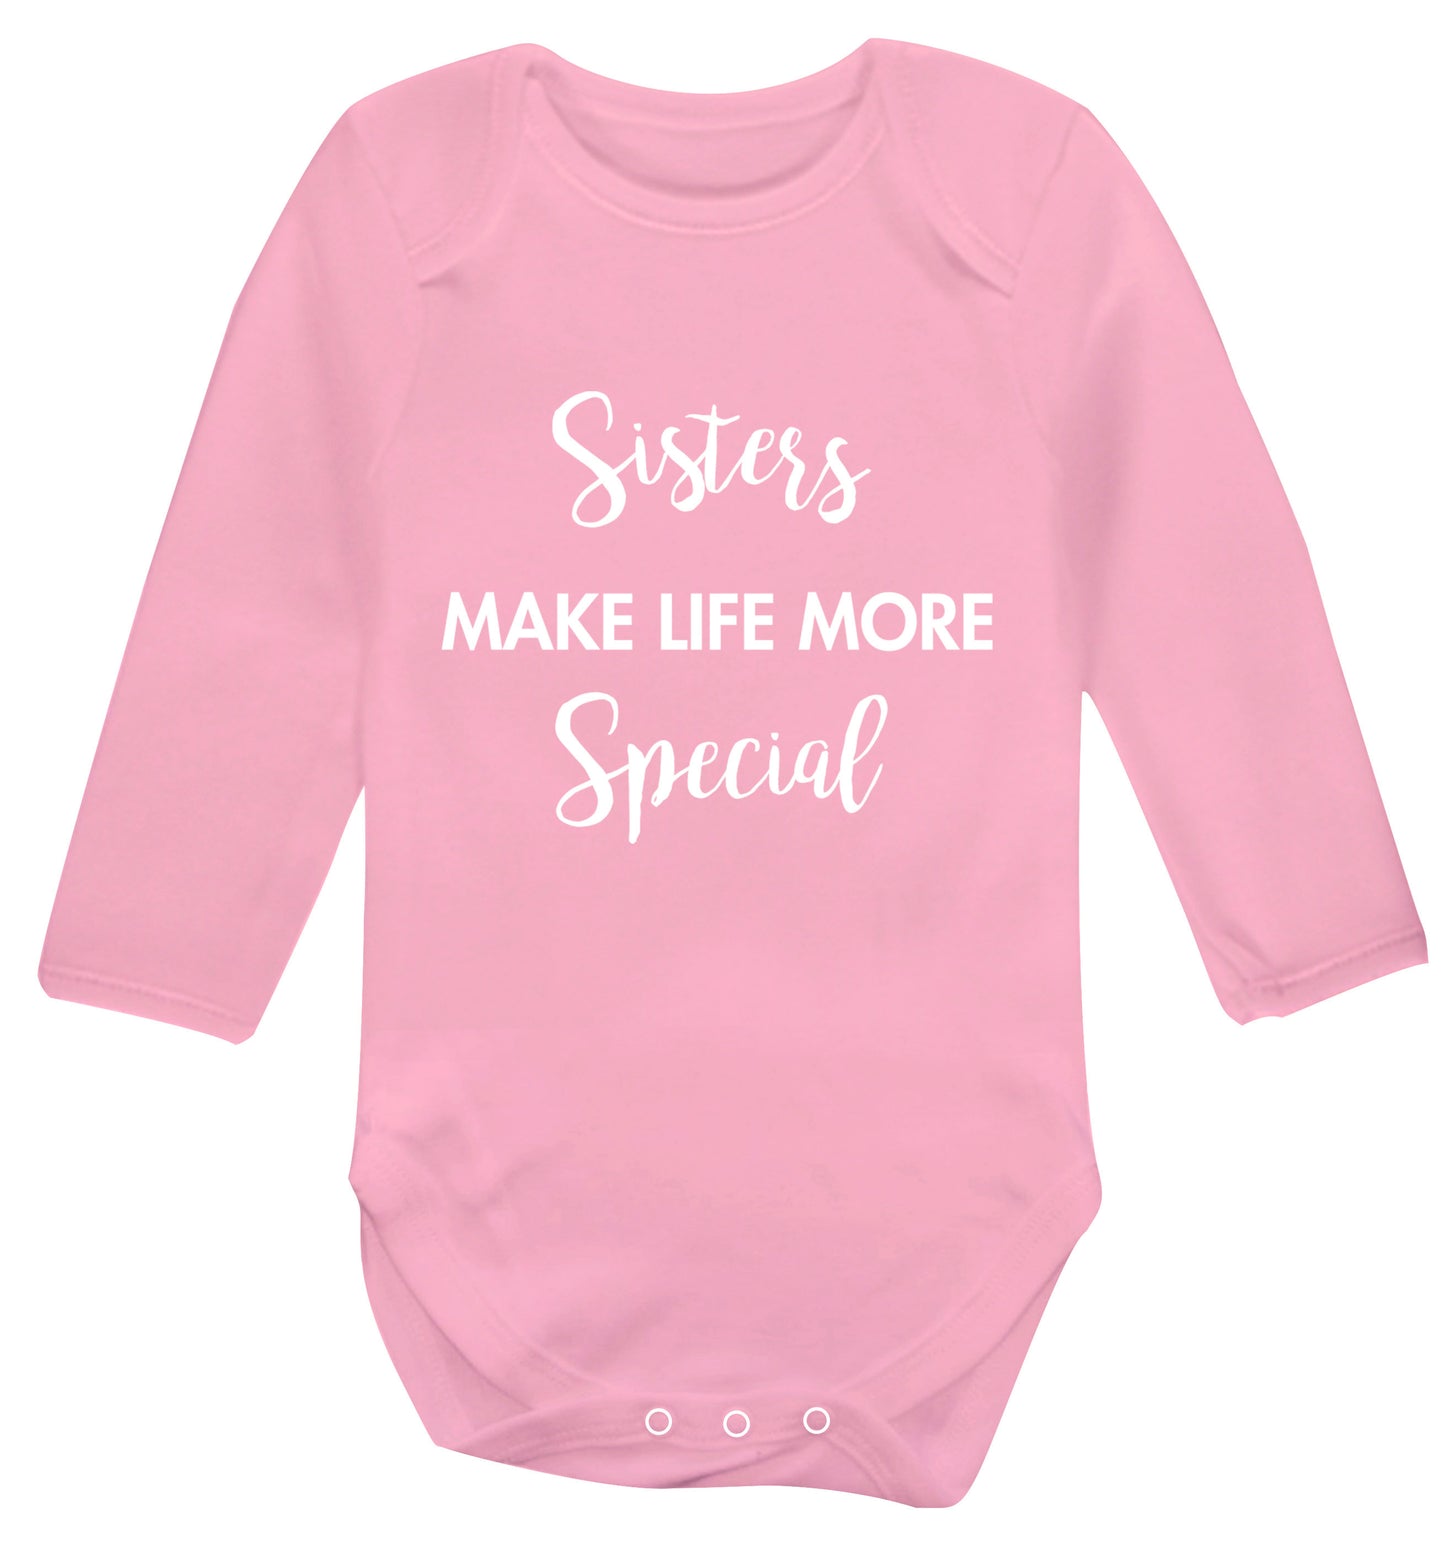 Sisters make life more special Baby Vest long sleeved pale pink 6-12 months